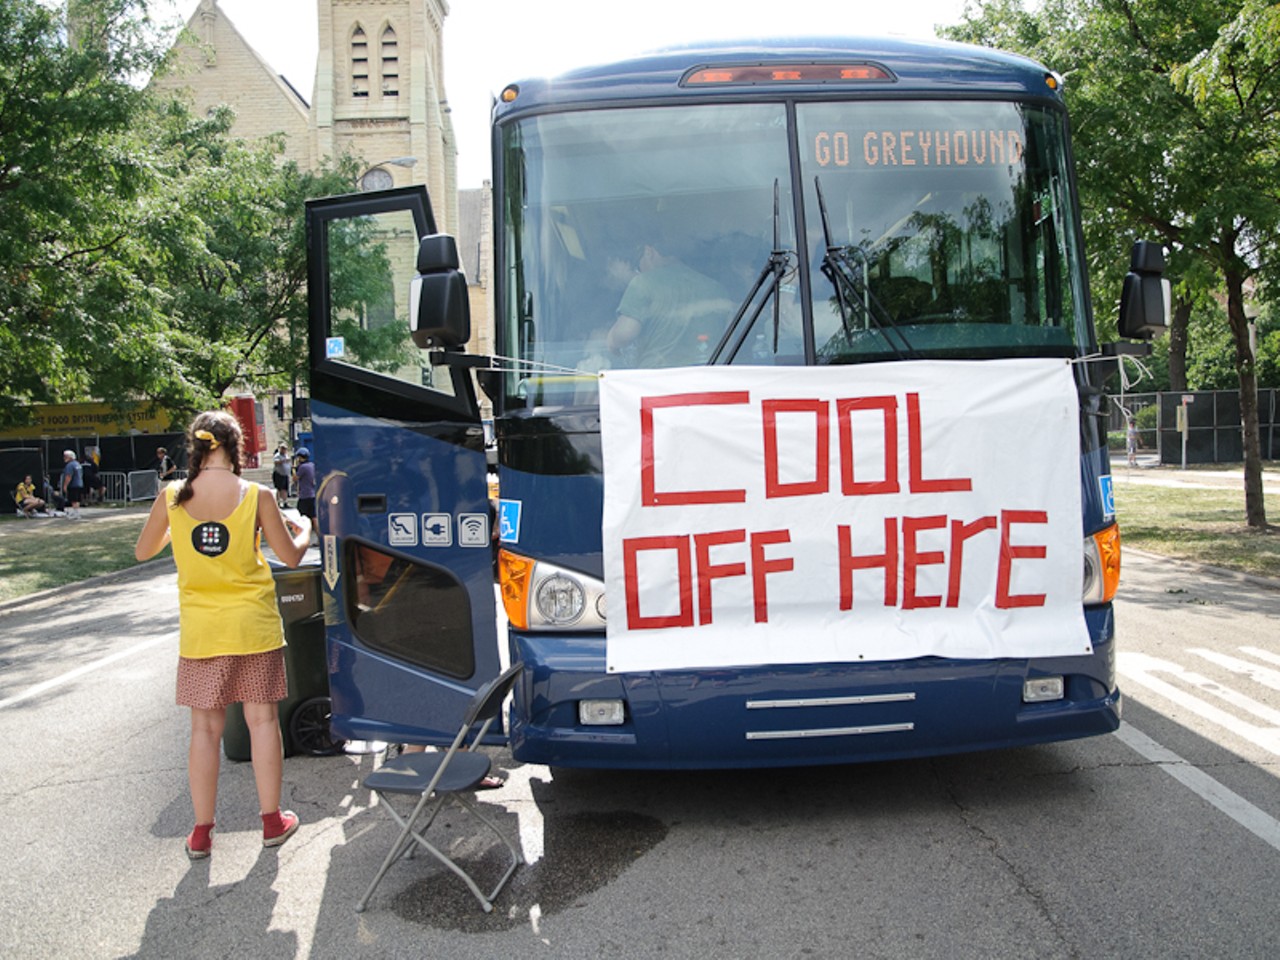 Greyhound had a cool-off bus for fans to escape the heat -- and a rapping bus driver for good measure.